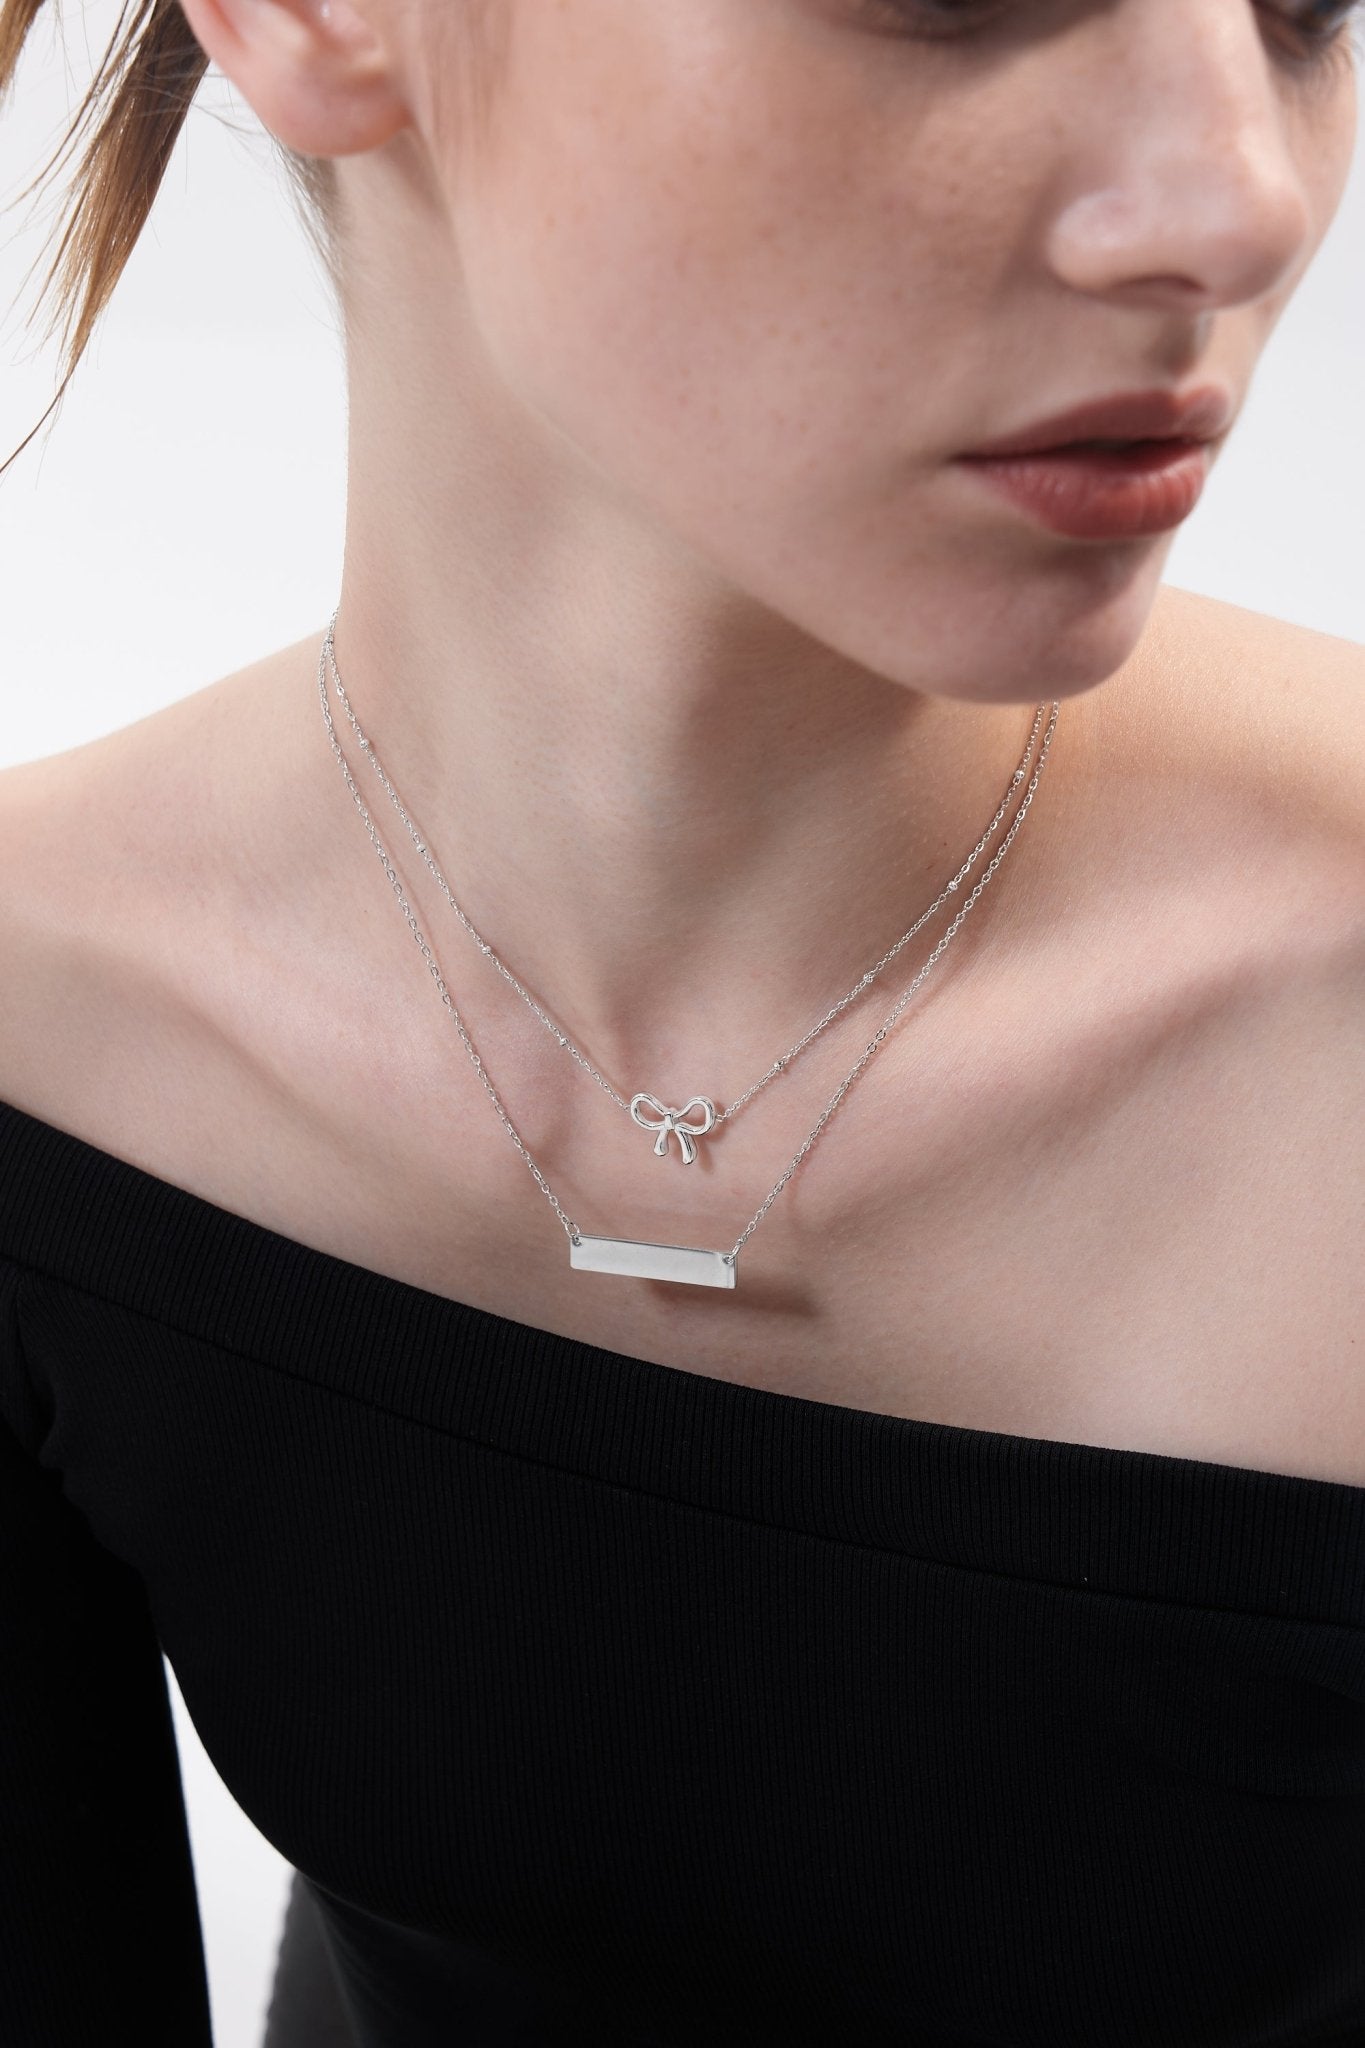 Bow Necklaces - Flaire & Co.